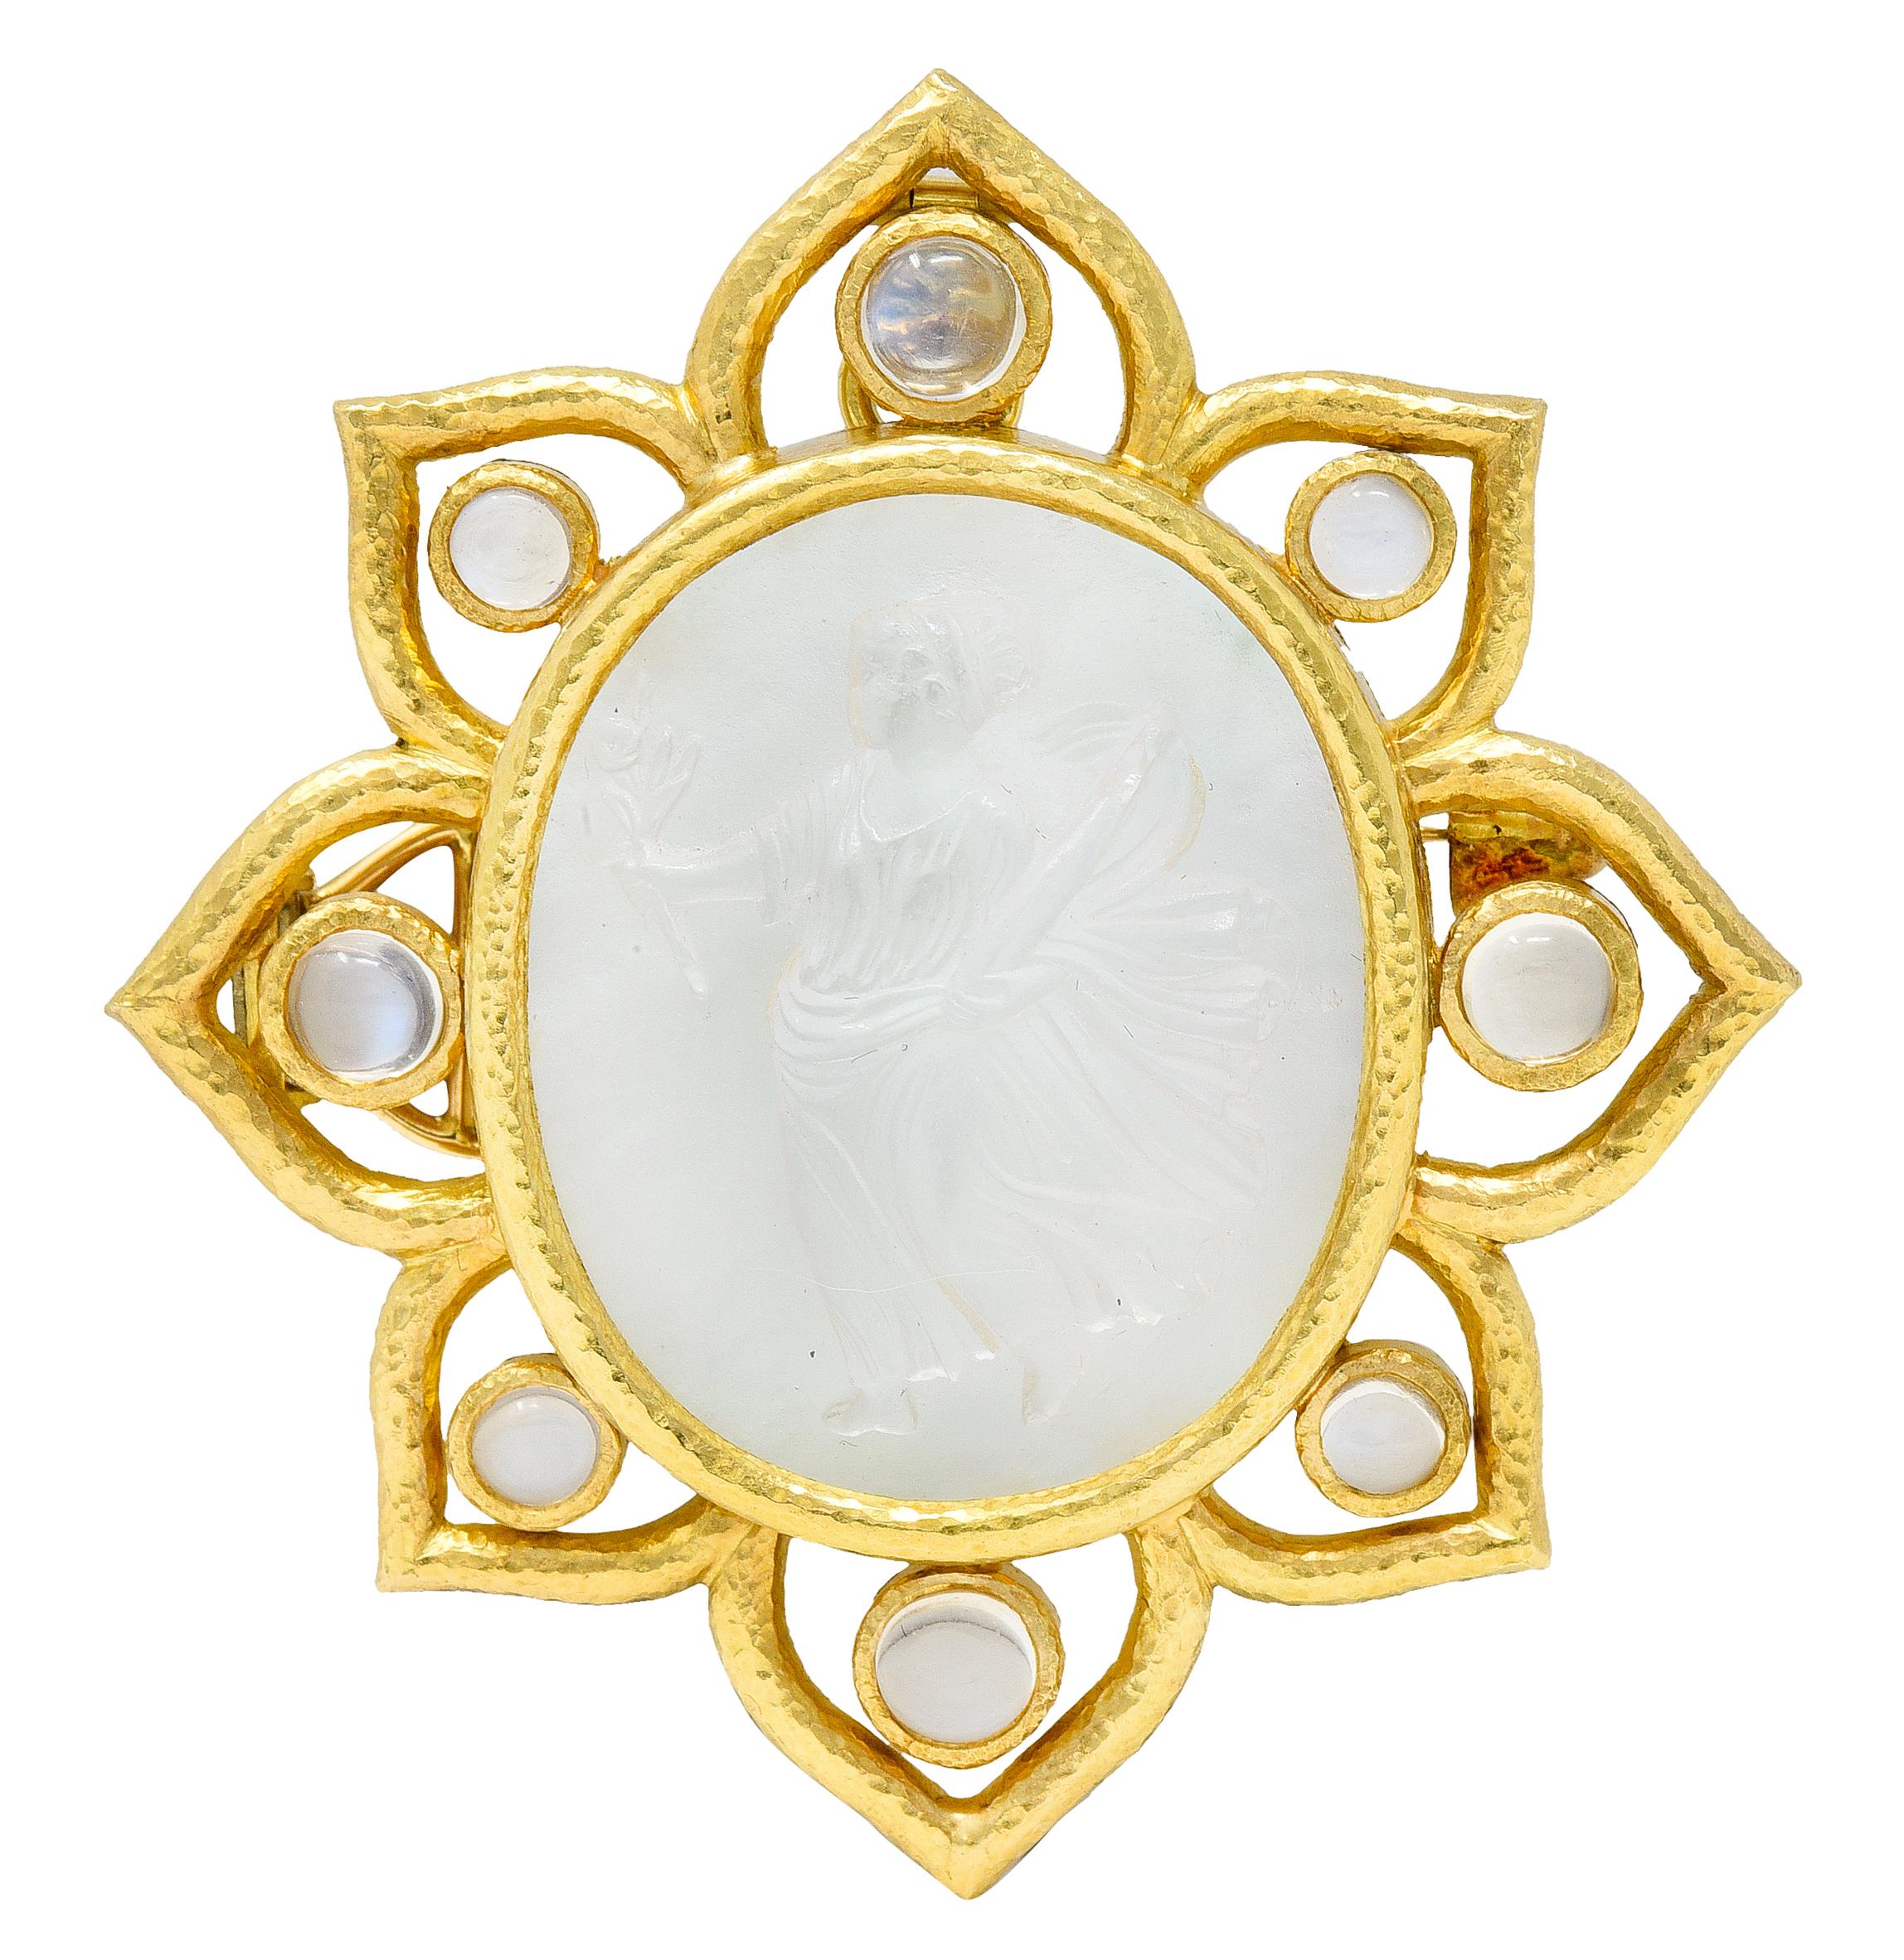 Pendant brooch is a radial burst form centering a bezel set 25.0 mm x 30.0 mm Venetian glass cameo

Transparent and colorless - backed by iridescent mother-of-pearl

Depicting the Roman goddess Flora holding her iconic flowers and vase

Featuring